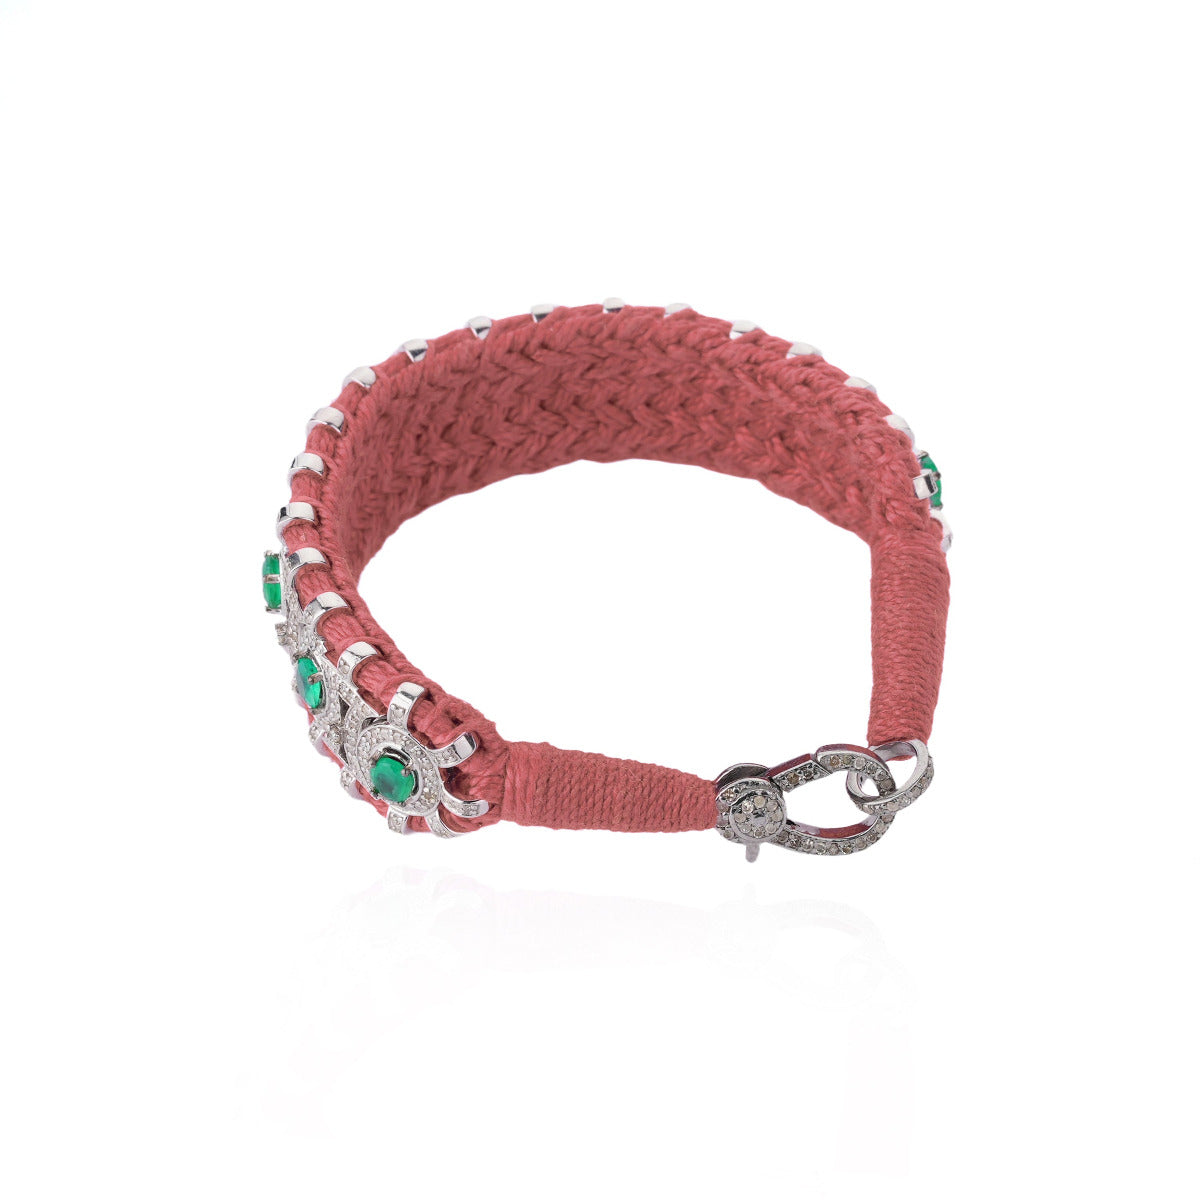 Sao Paulo Blush and Emeralds bracelet in 925 silver and diamonds